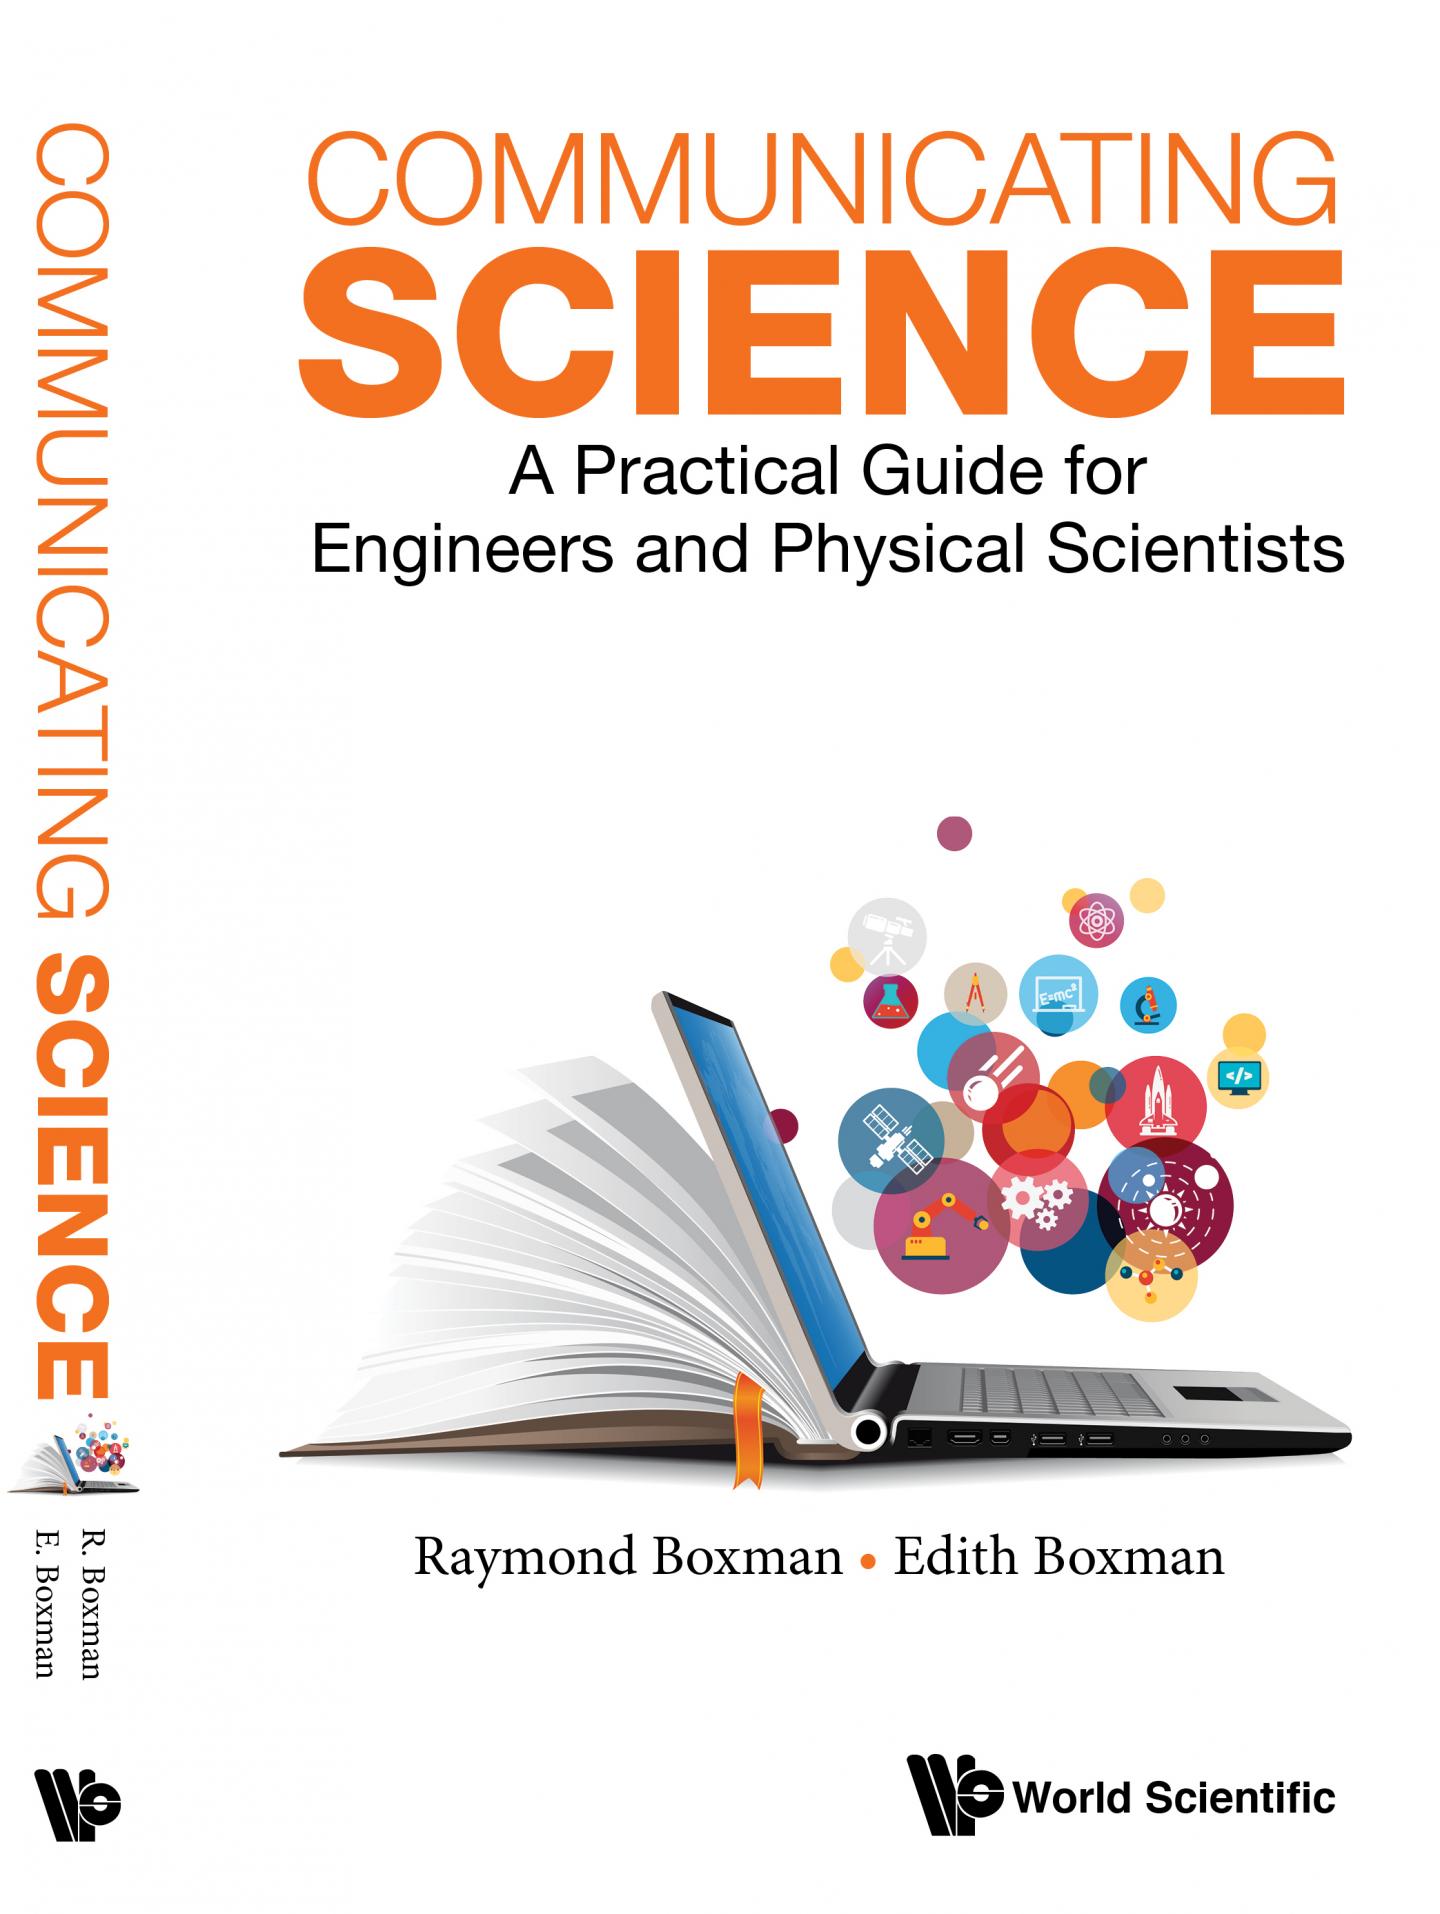 Communicating Science: a practical guide for engineers and physical scientists